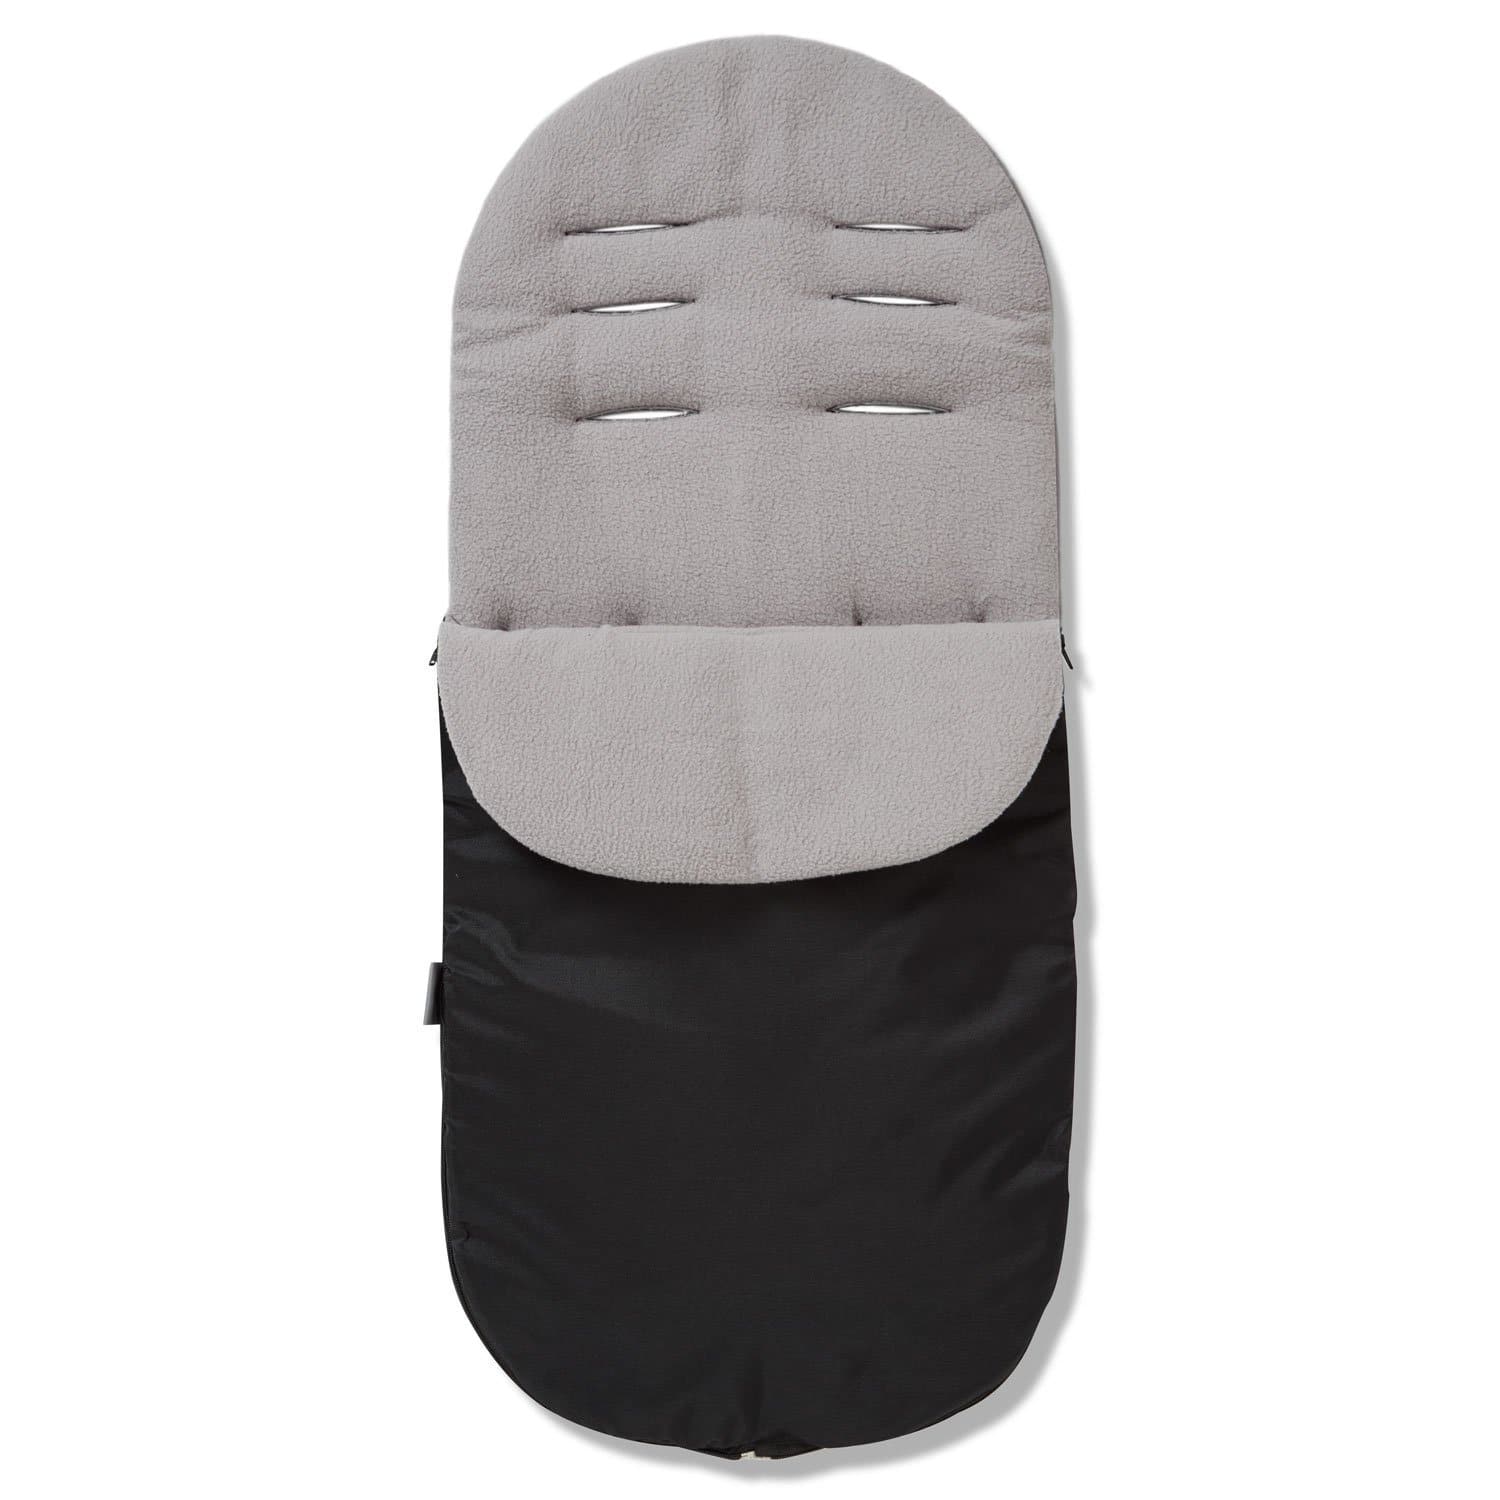 Footmuff / Cosy Toes Compatible with Kids Kargo - For Your Little One